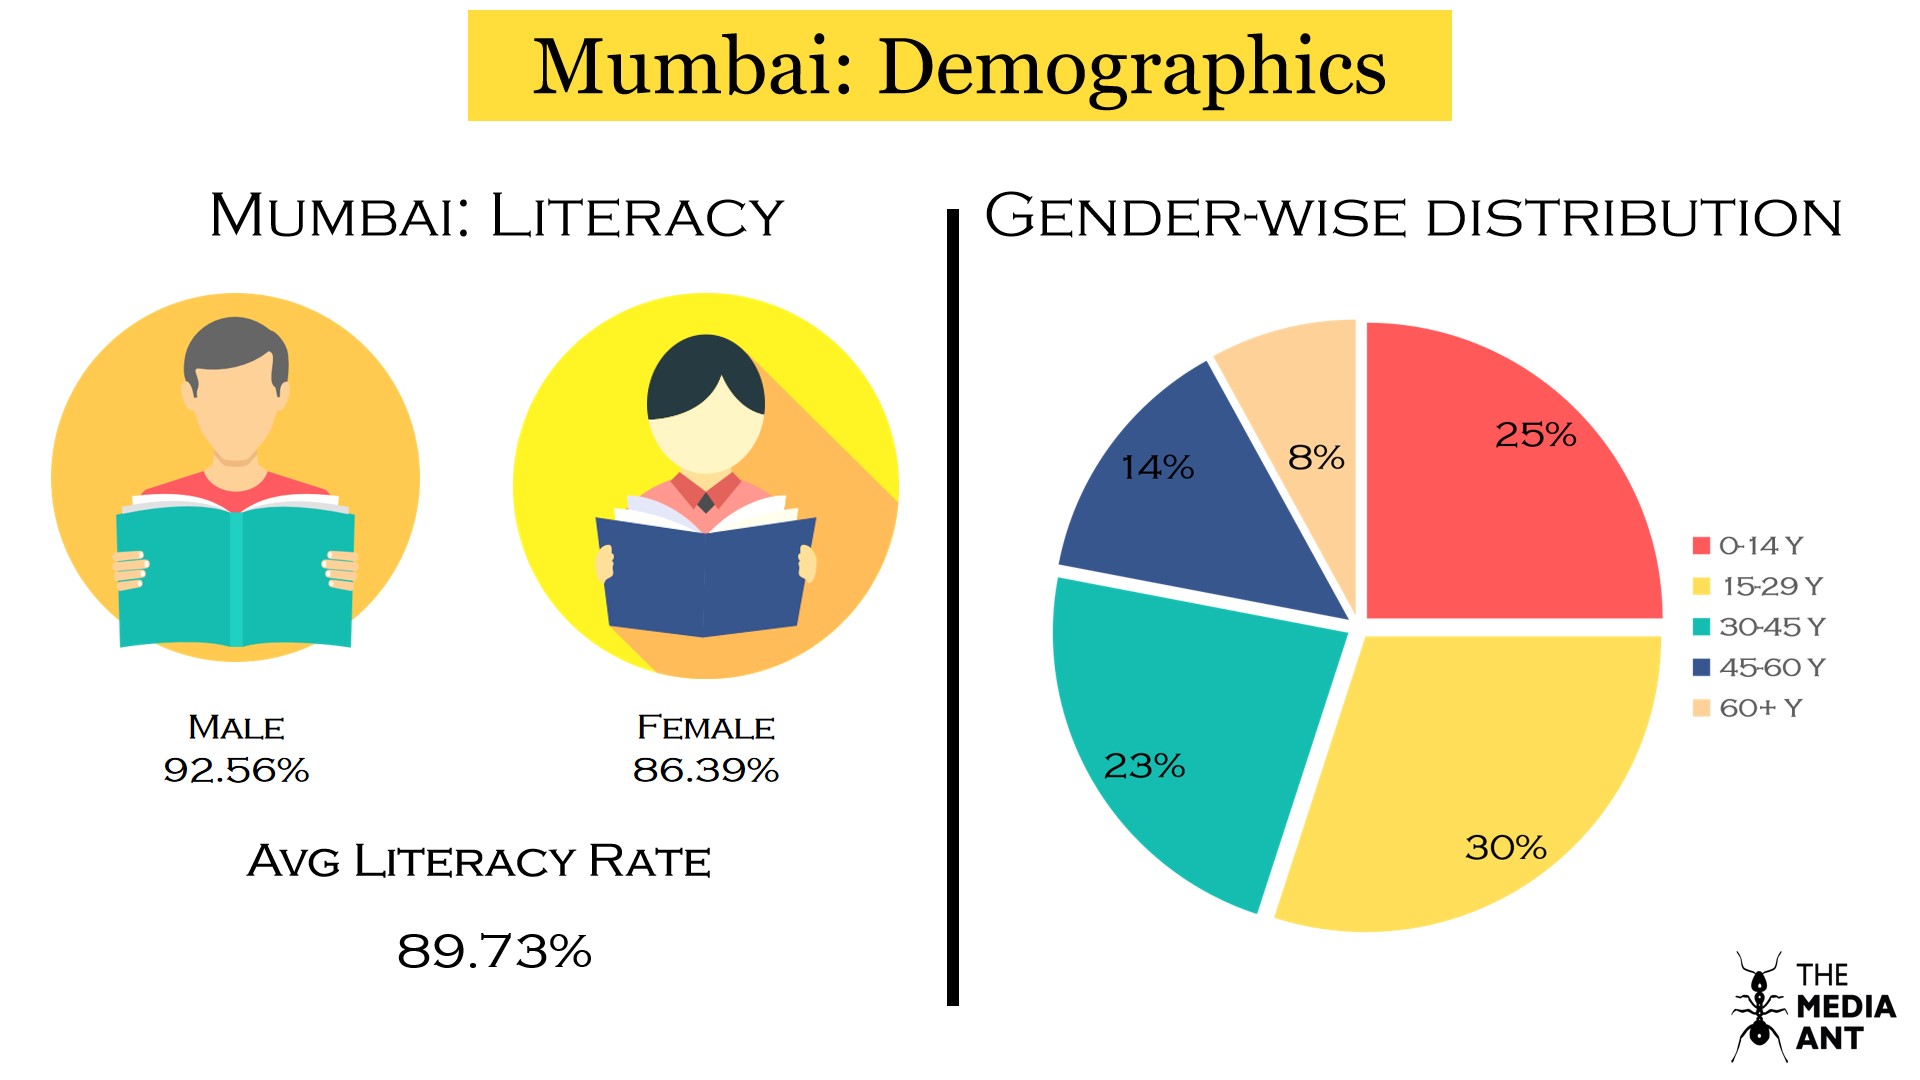 Mumbai literacy rate and gender-wise population distribution